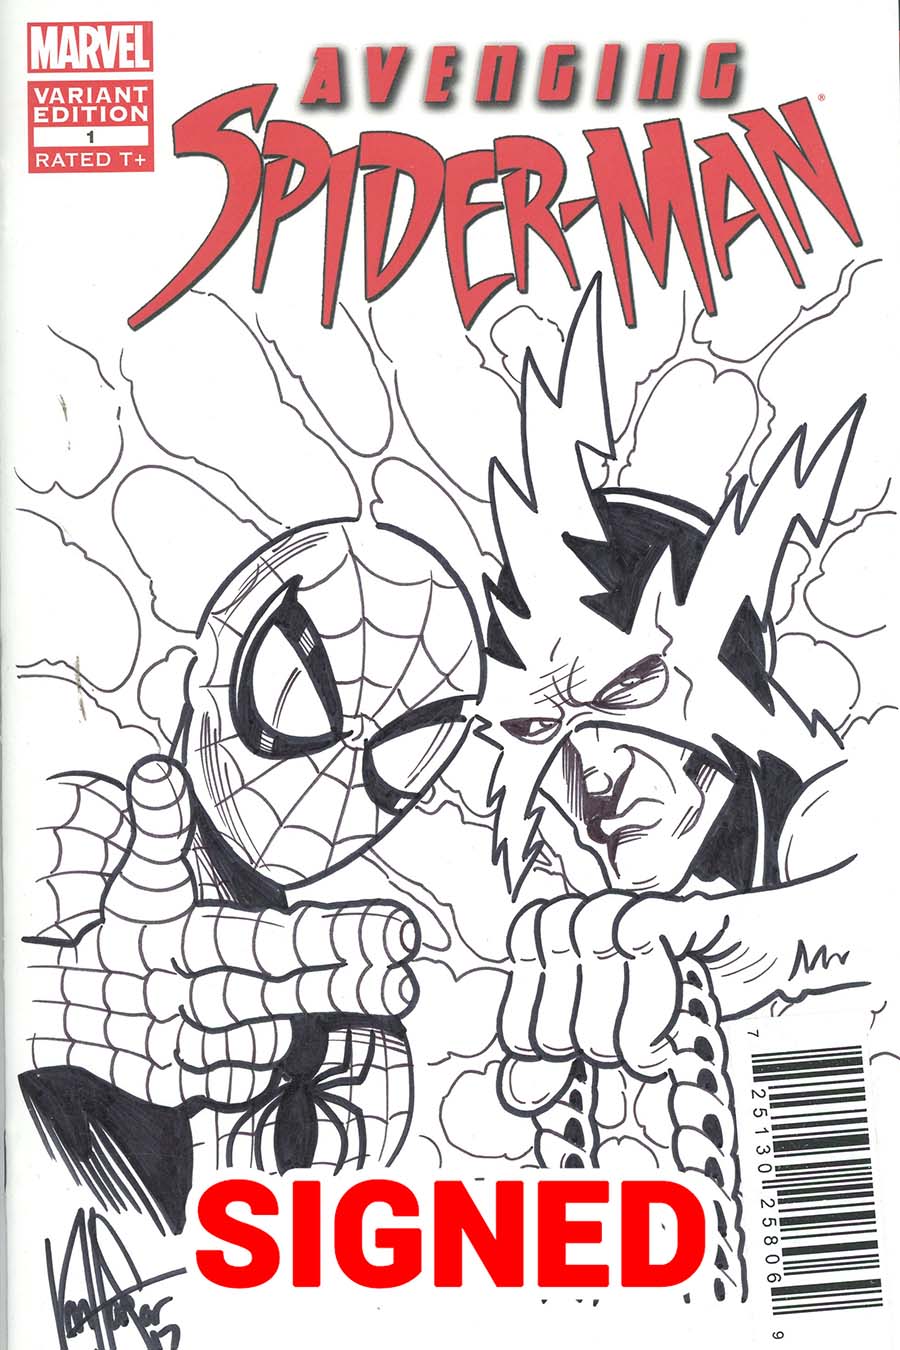 Avenging Spider-Man #1 Cover F DF Run The Jewels Hand-Drawn Sketch & Signed By Ken Haeser